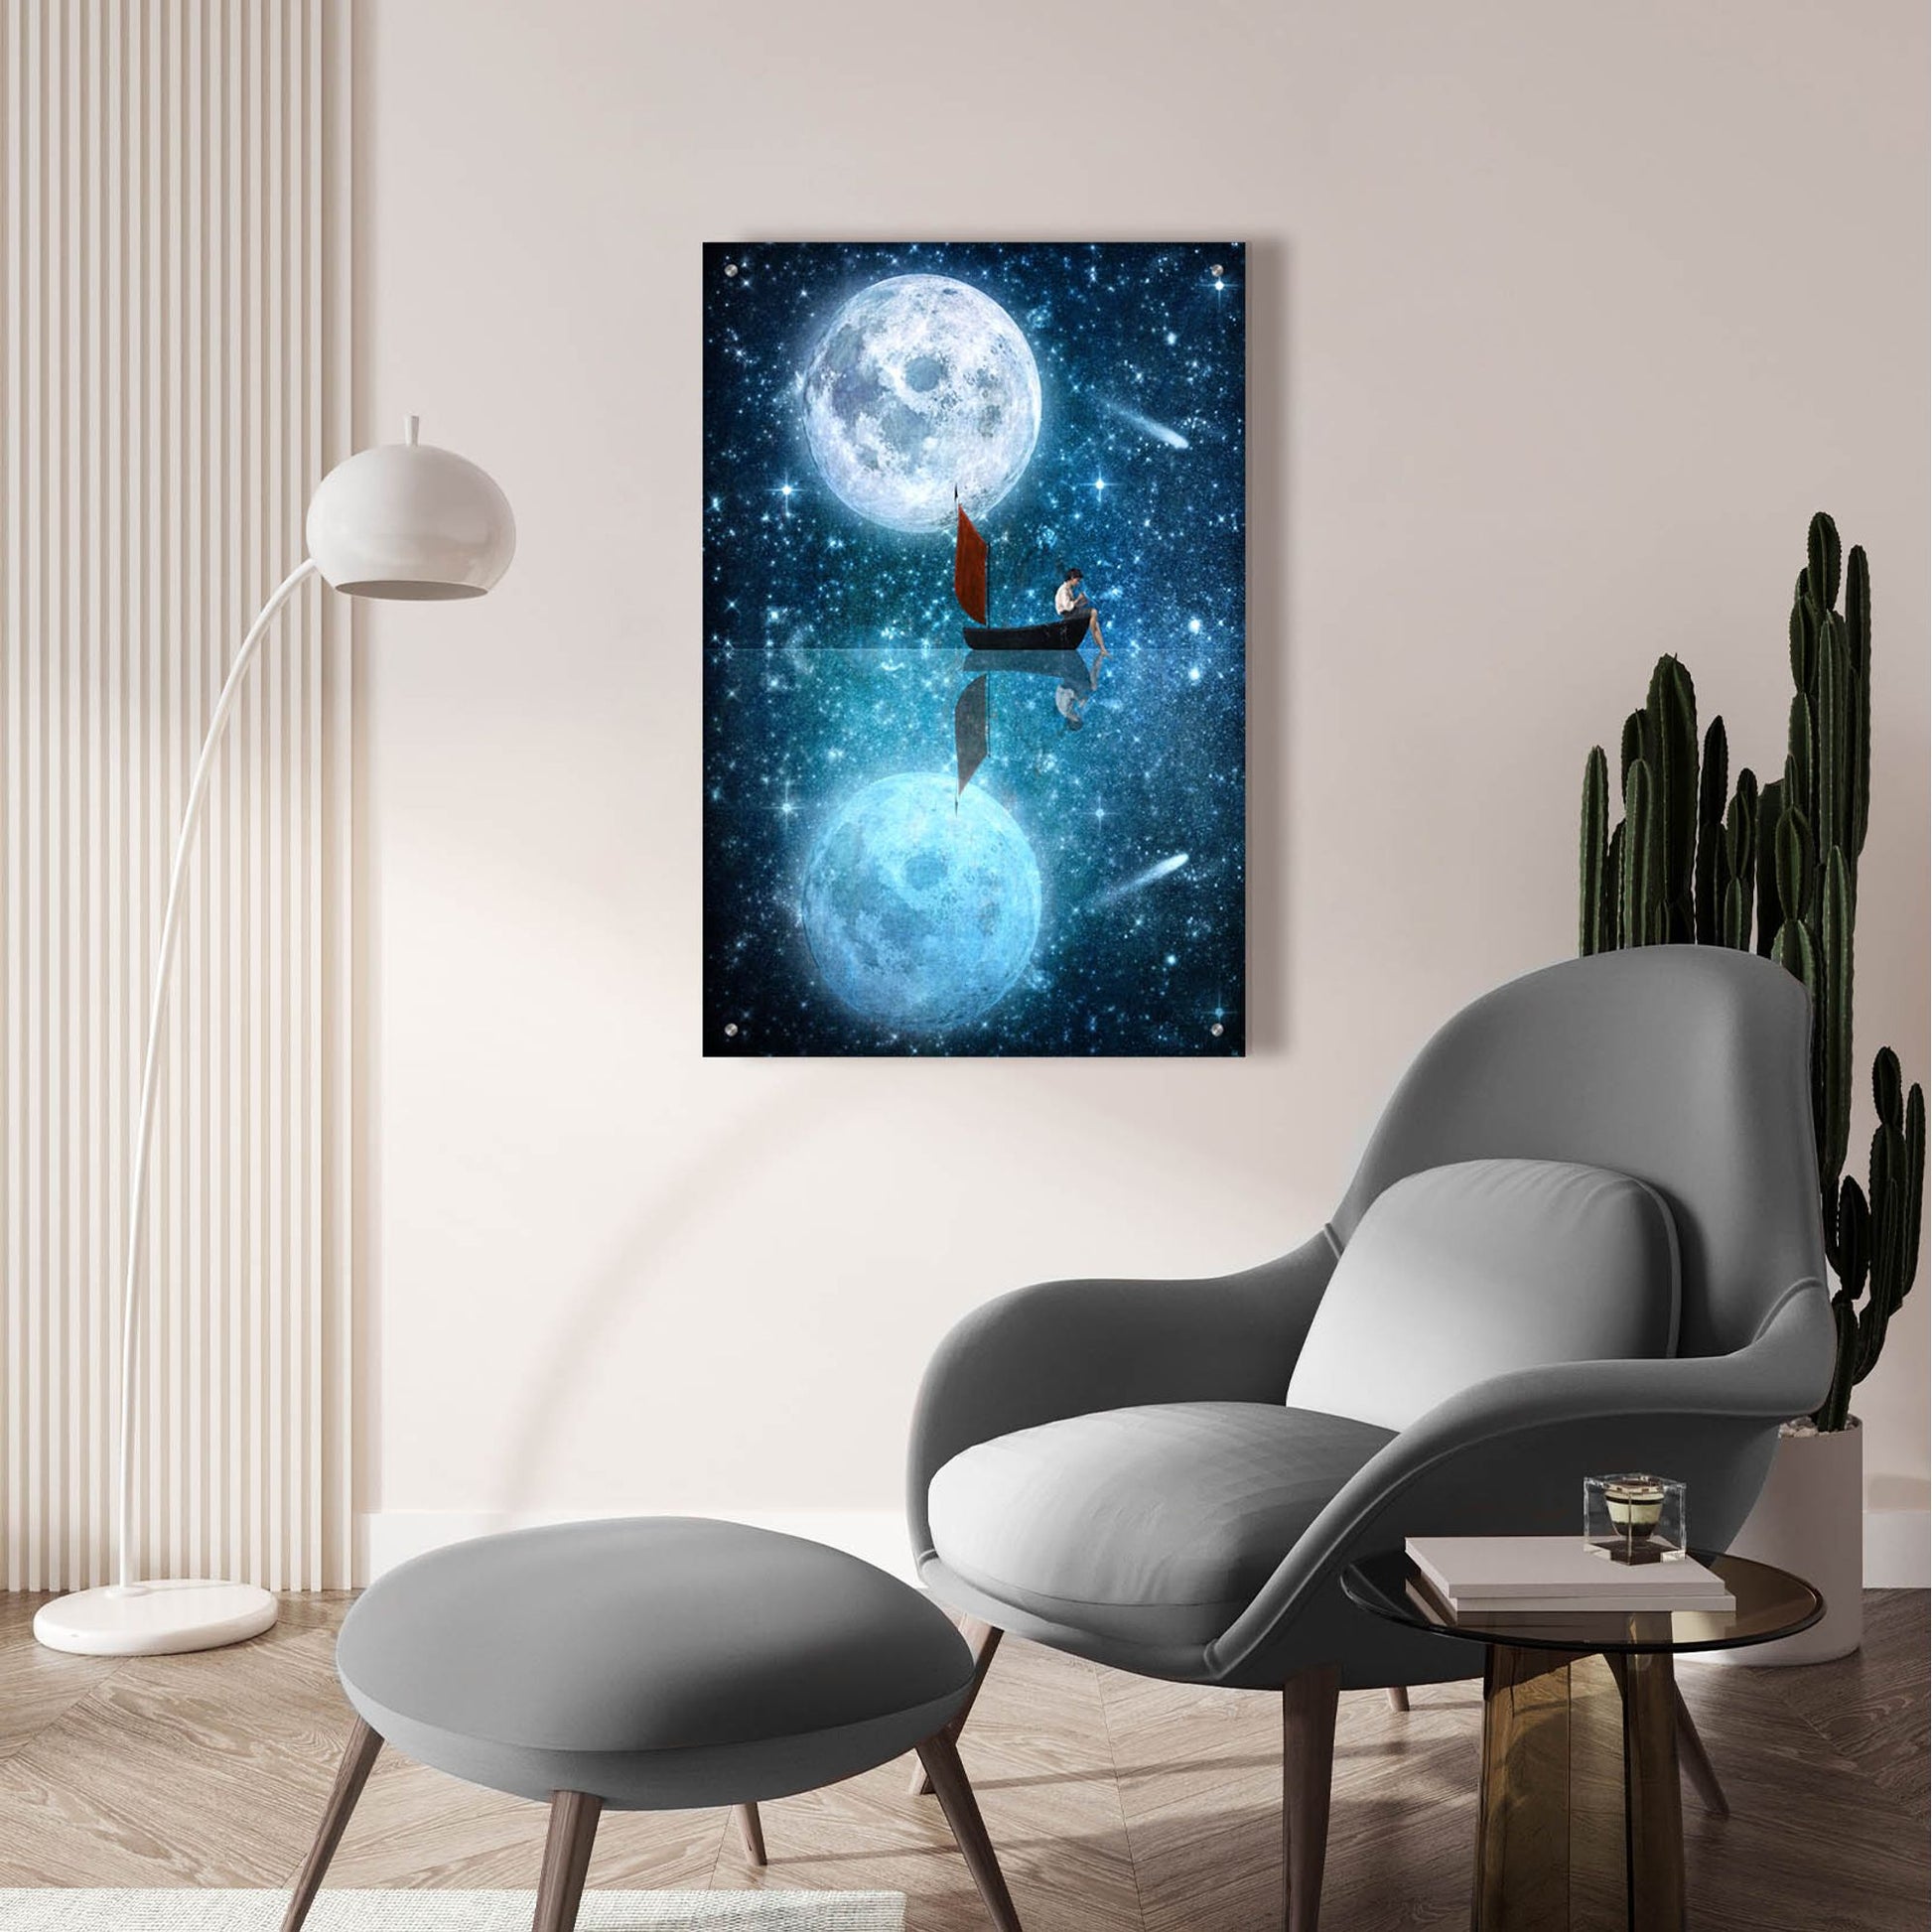 Epic Art 'The Moon And Me' by Diogo Verissimo, Acrylic Glass Wall Art,24x36